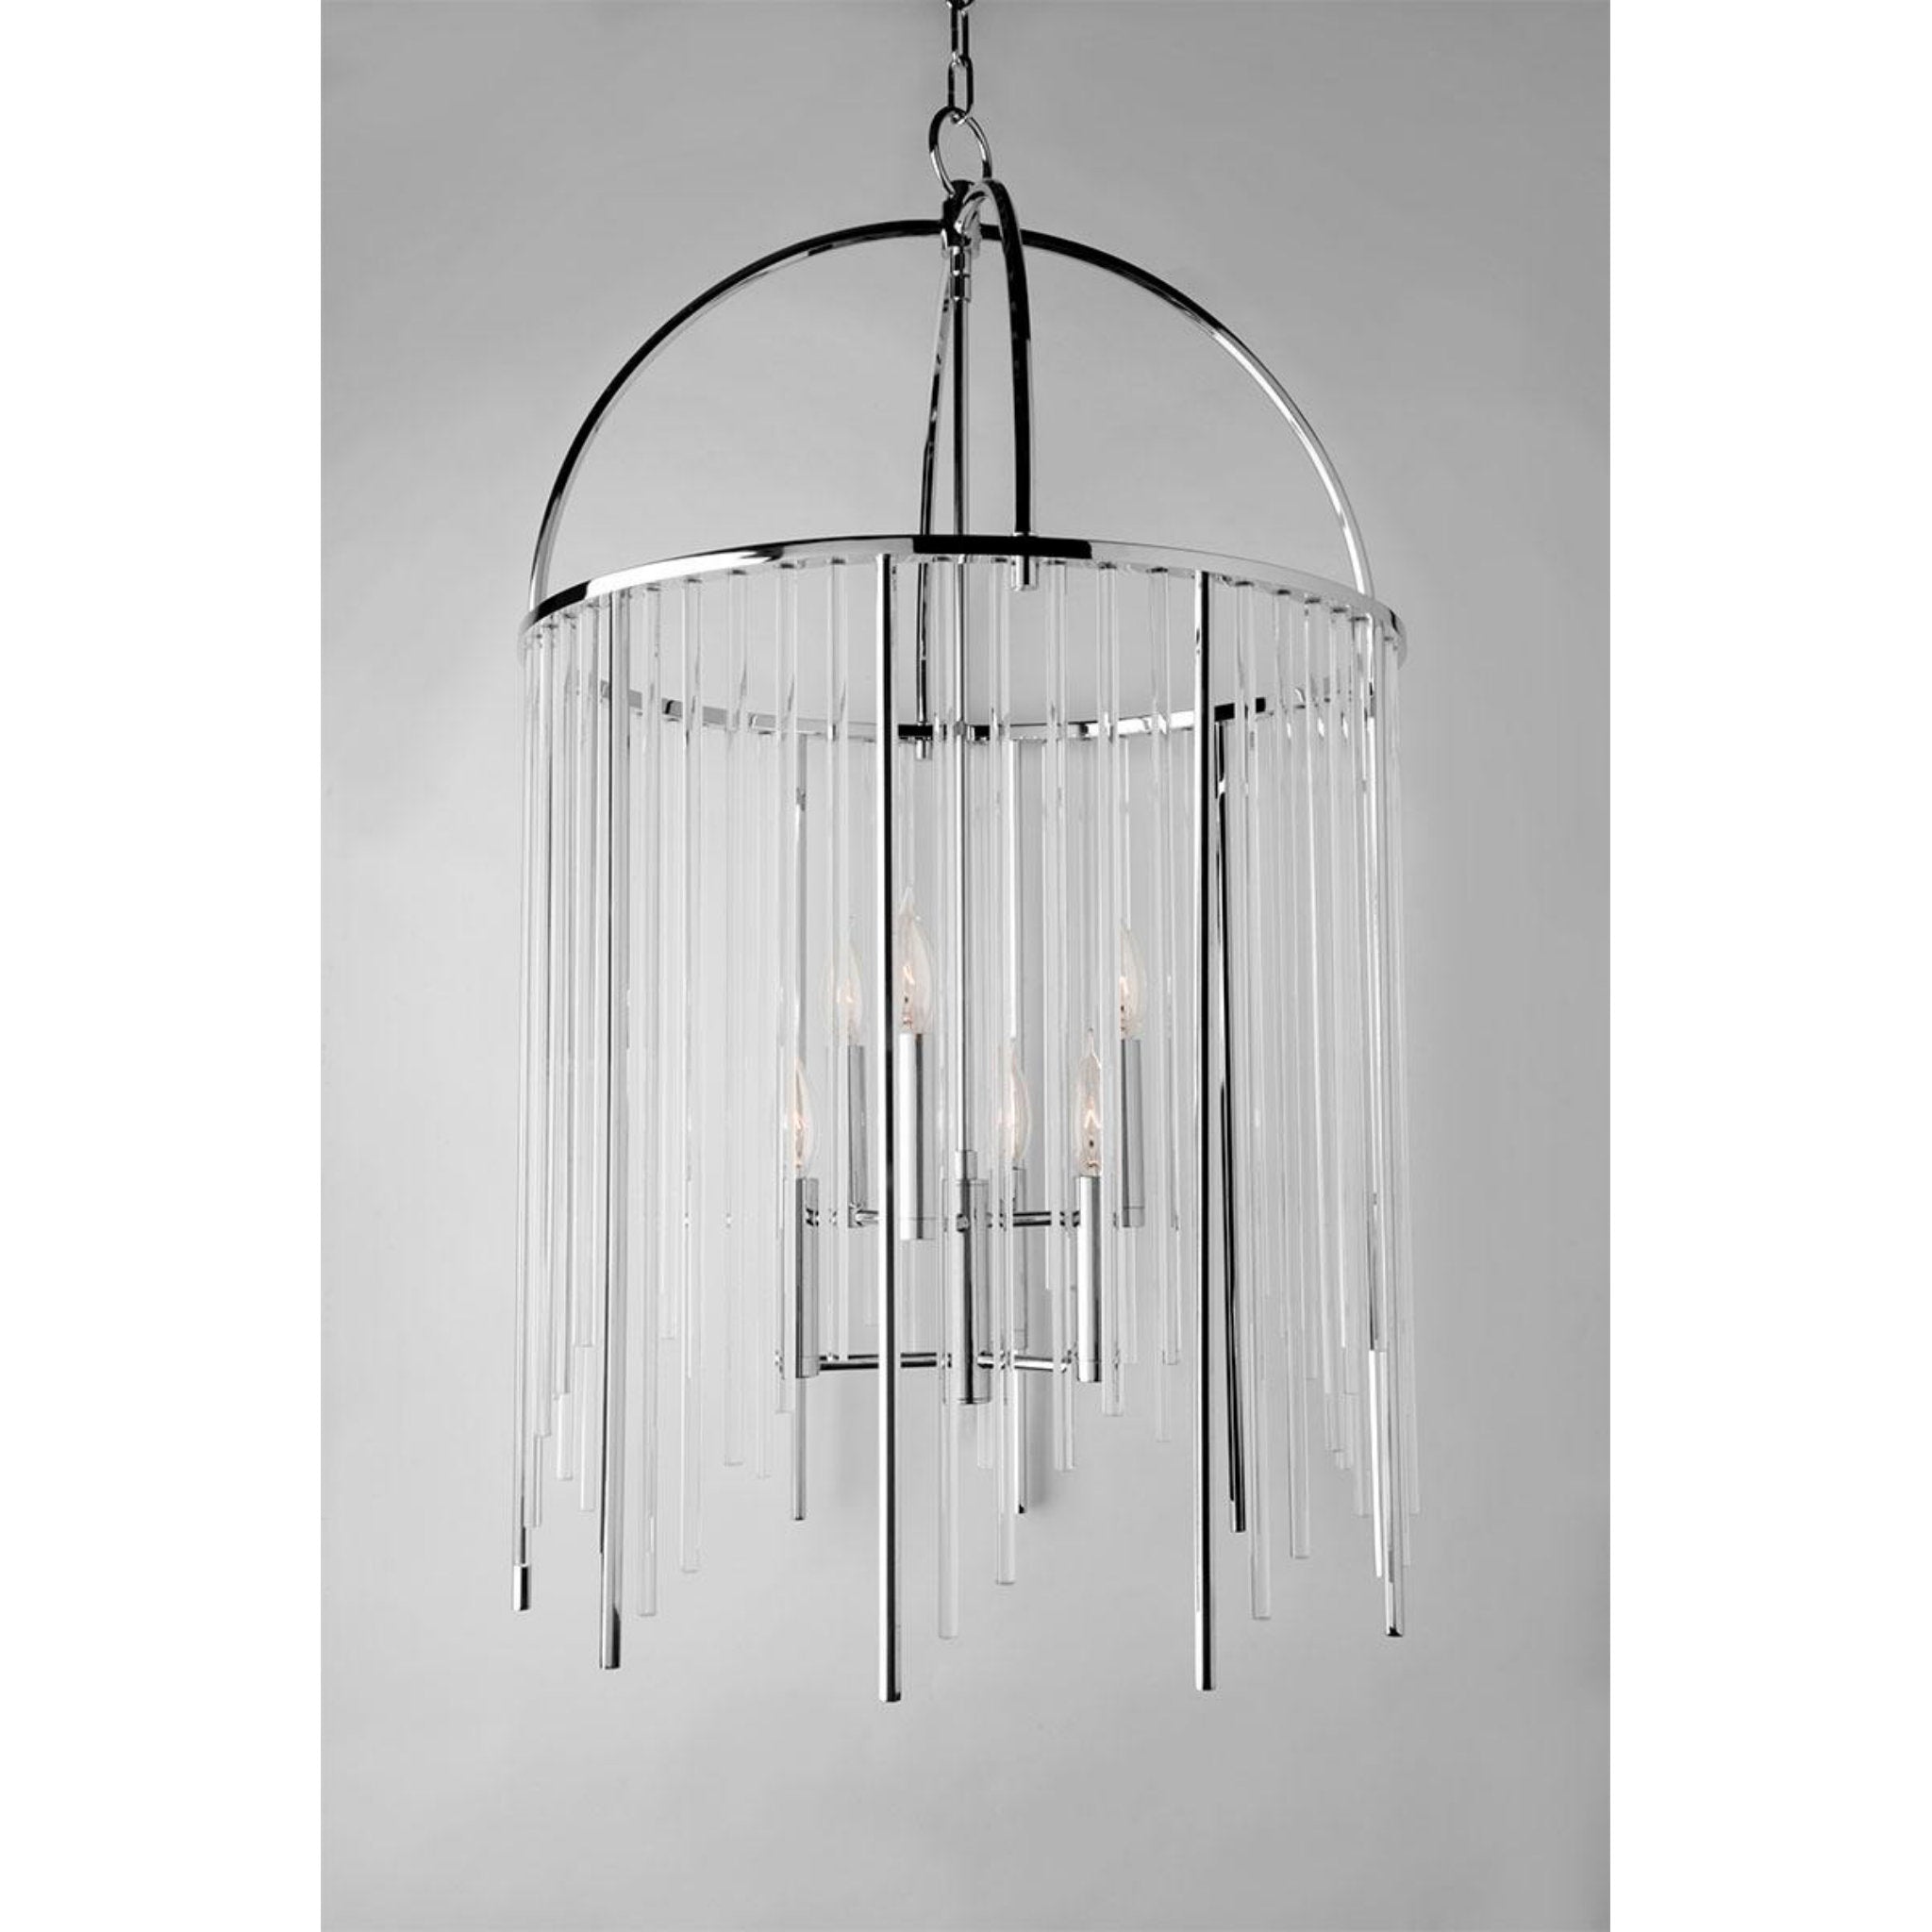 Lewis 4 Light Pendant in Aged Brass